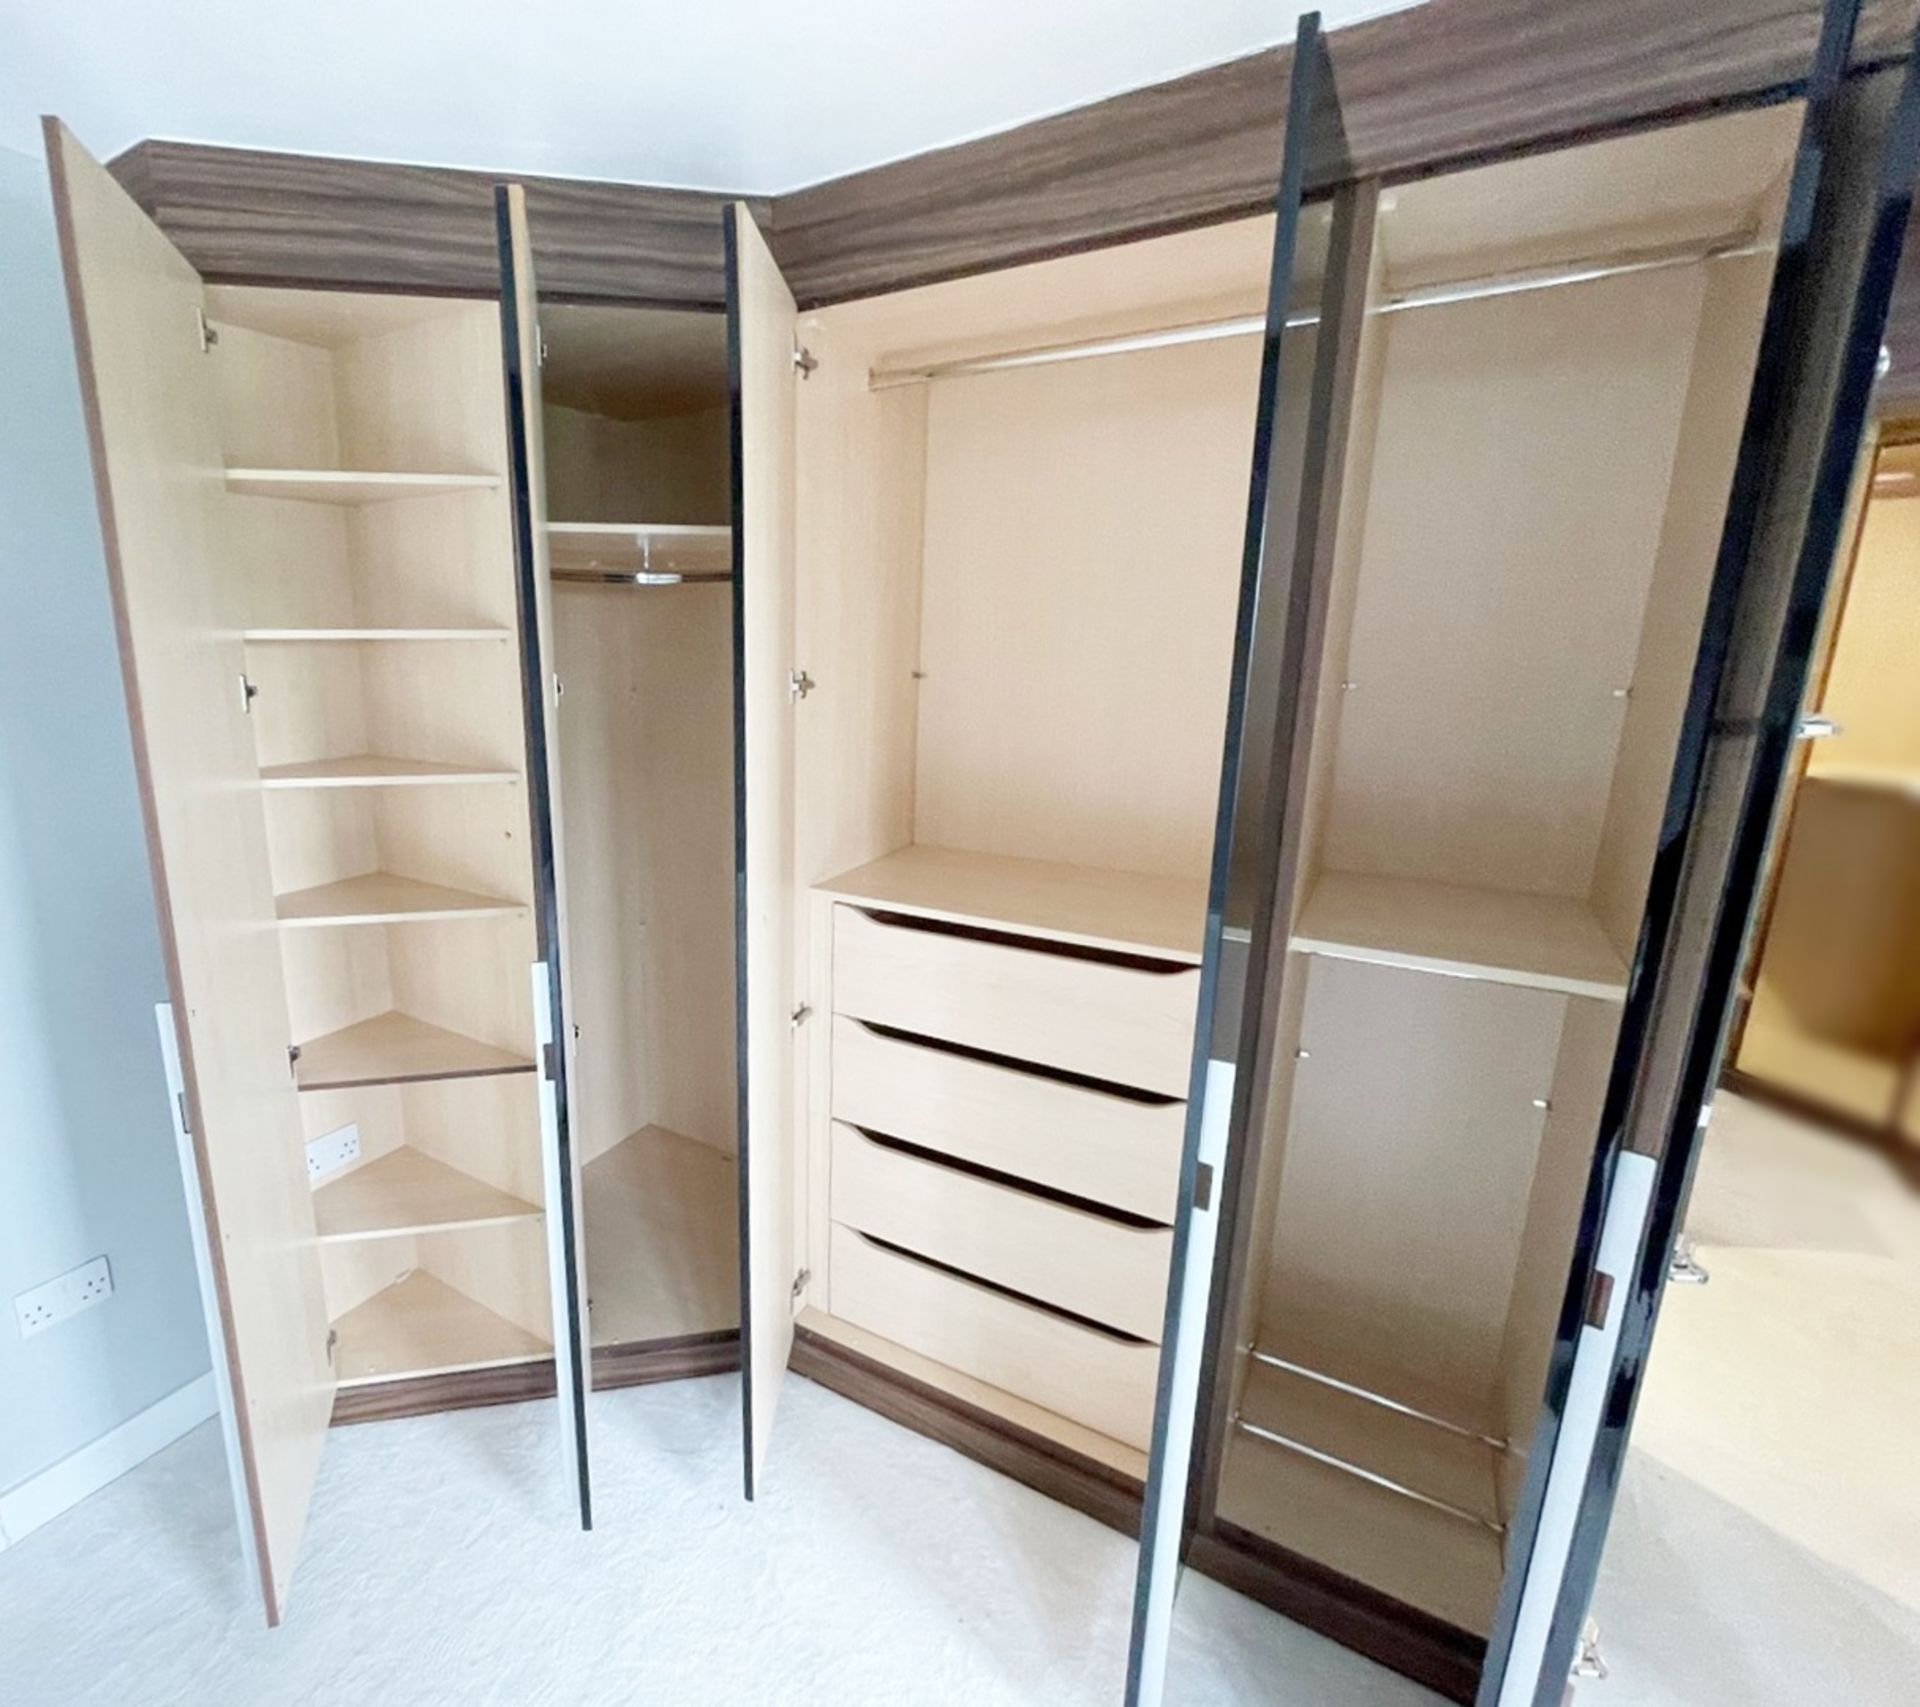 Bank Of Premium Bespoke Fitted Wardrobes With Black Glass Door Frontage - Approx. 4-Metres In Length - Image 8 of 18